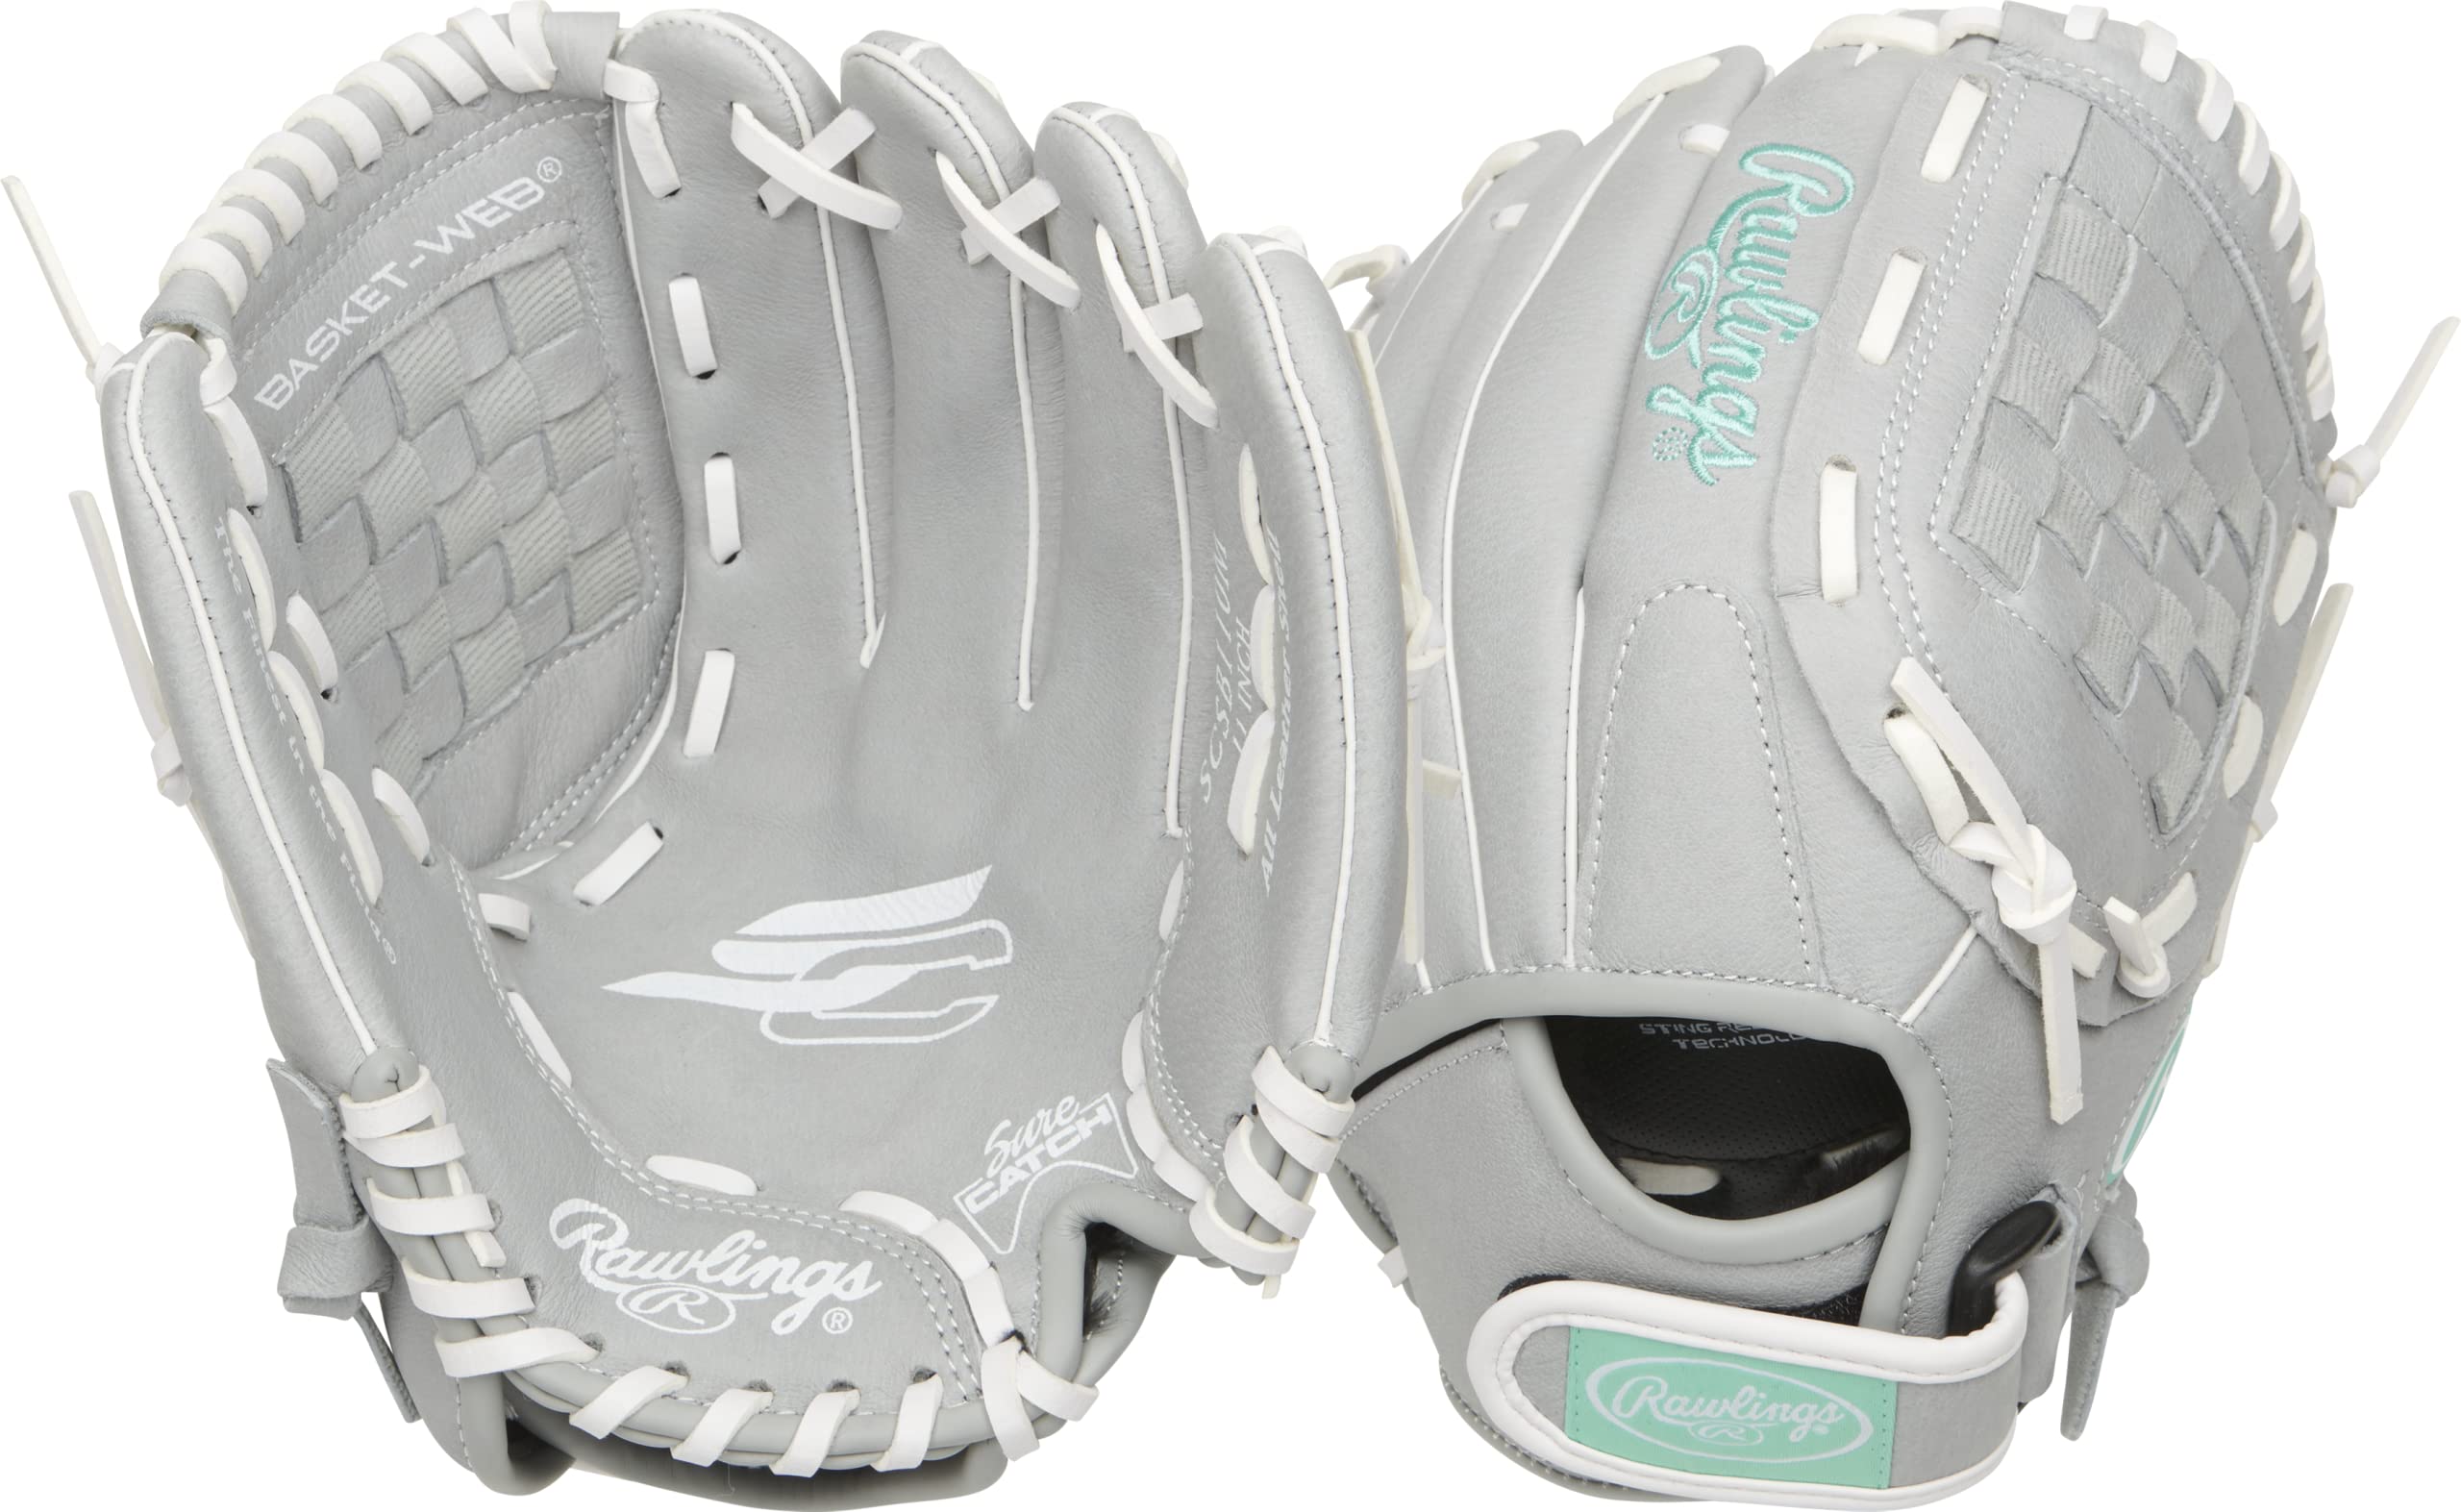 Rawlings Sure Catch Series Fastpitch Softball Glove, Basket Web, 11 inch, Right Hand Throw